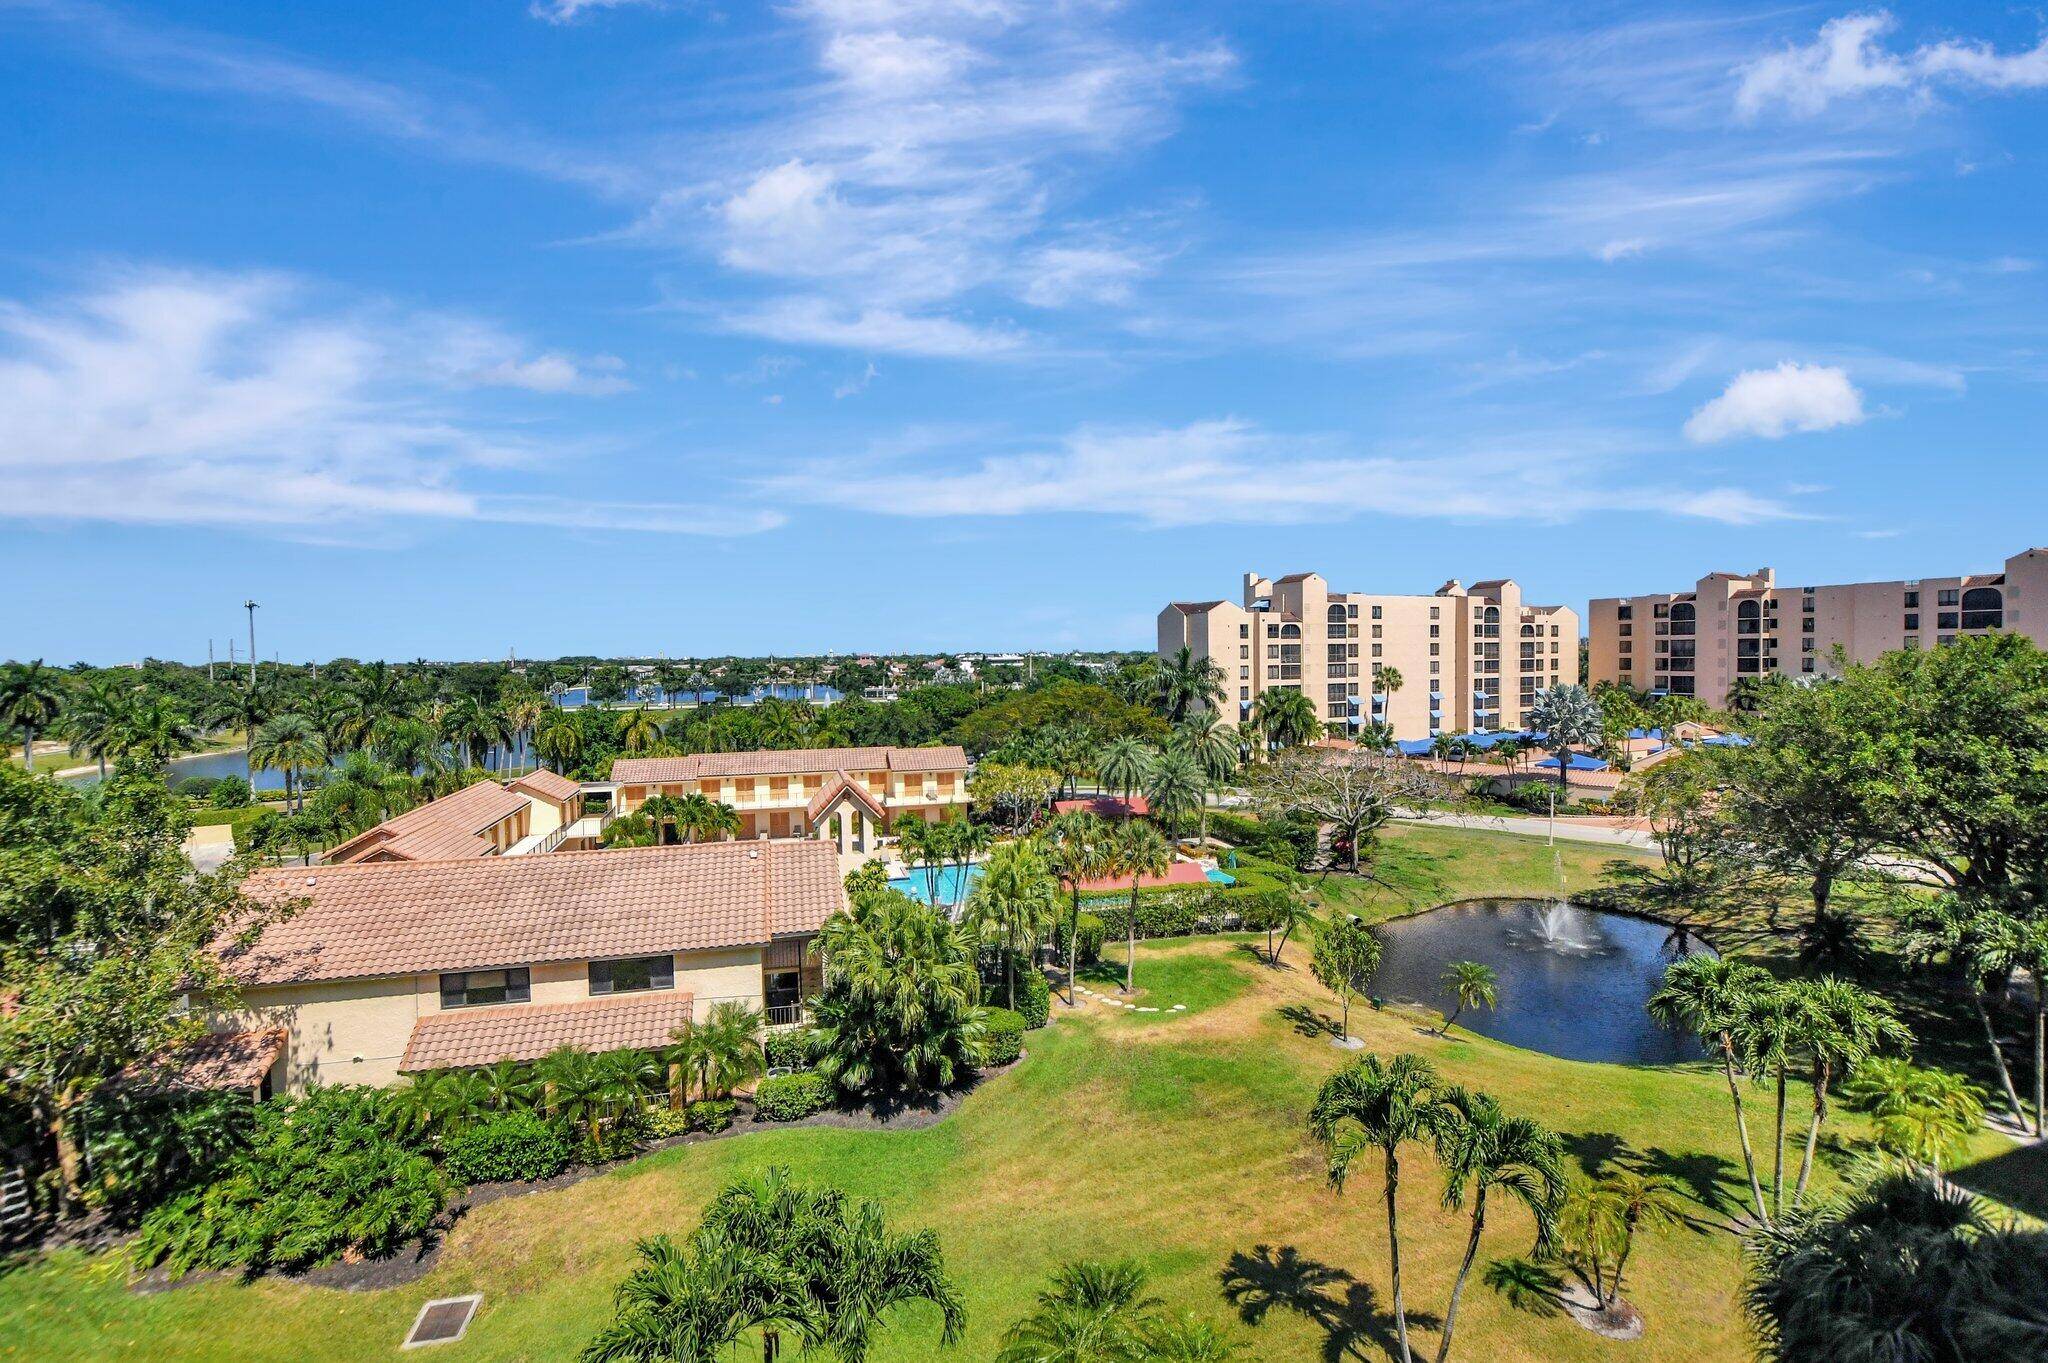 Take in the breath taking views of this 6th floor 2 bedroom easily converts to 3 bedroom, 2 bath oasis in the Promenade at Boca Pointe.